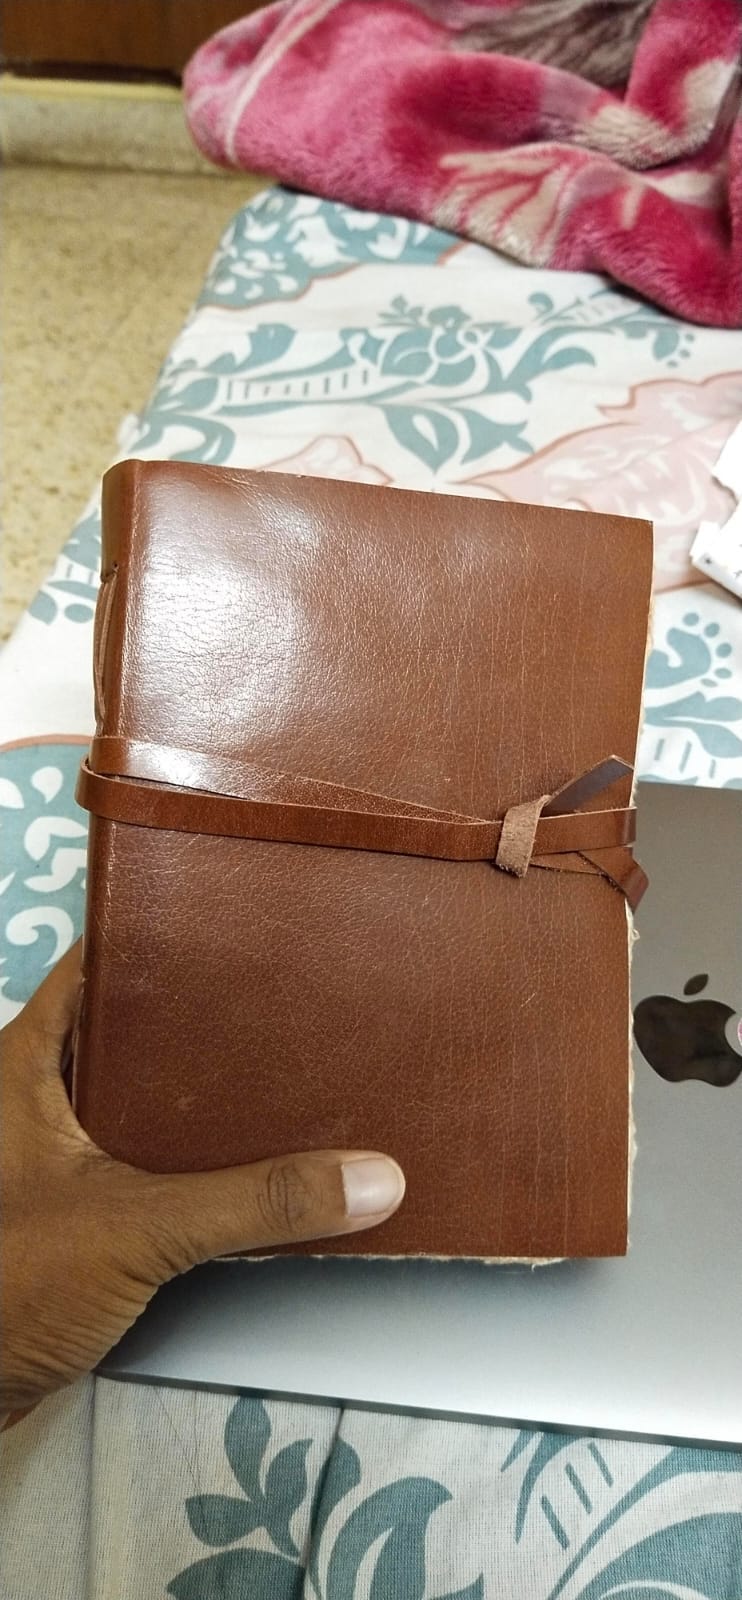 A hand holding a notebook with a leather cover. Beside it, a laptop sits on the bed.